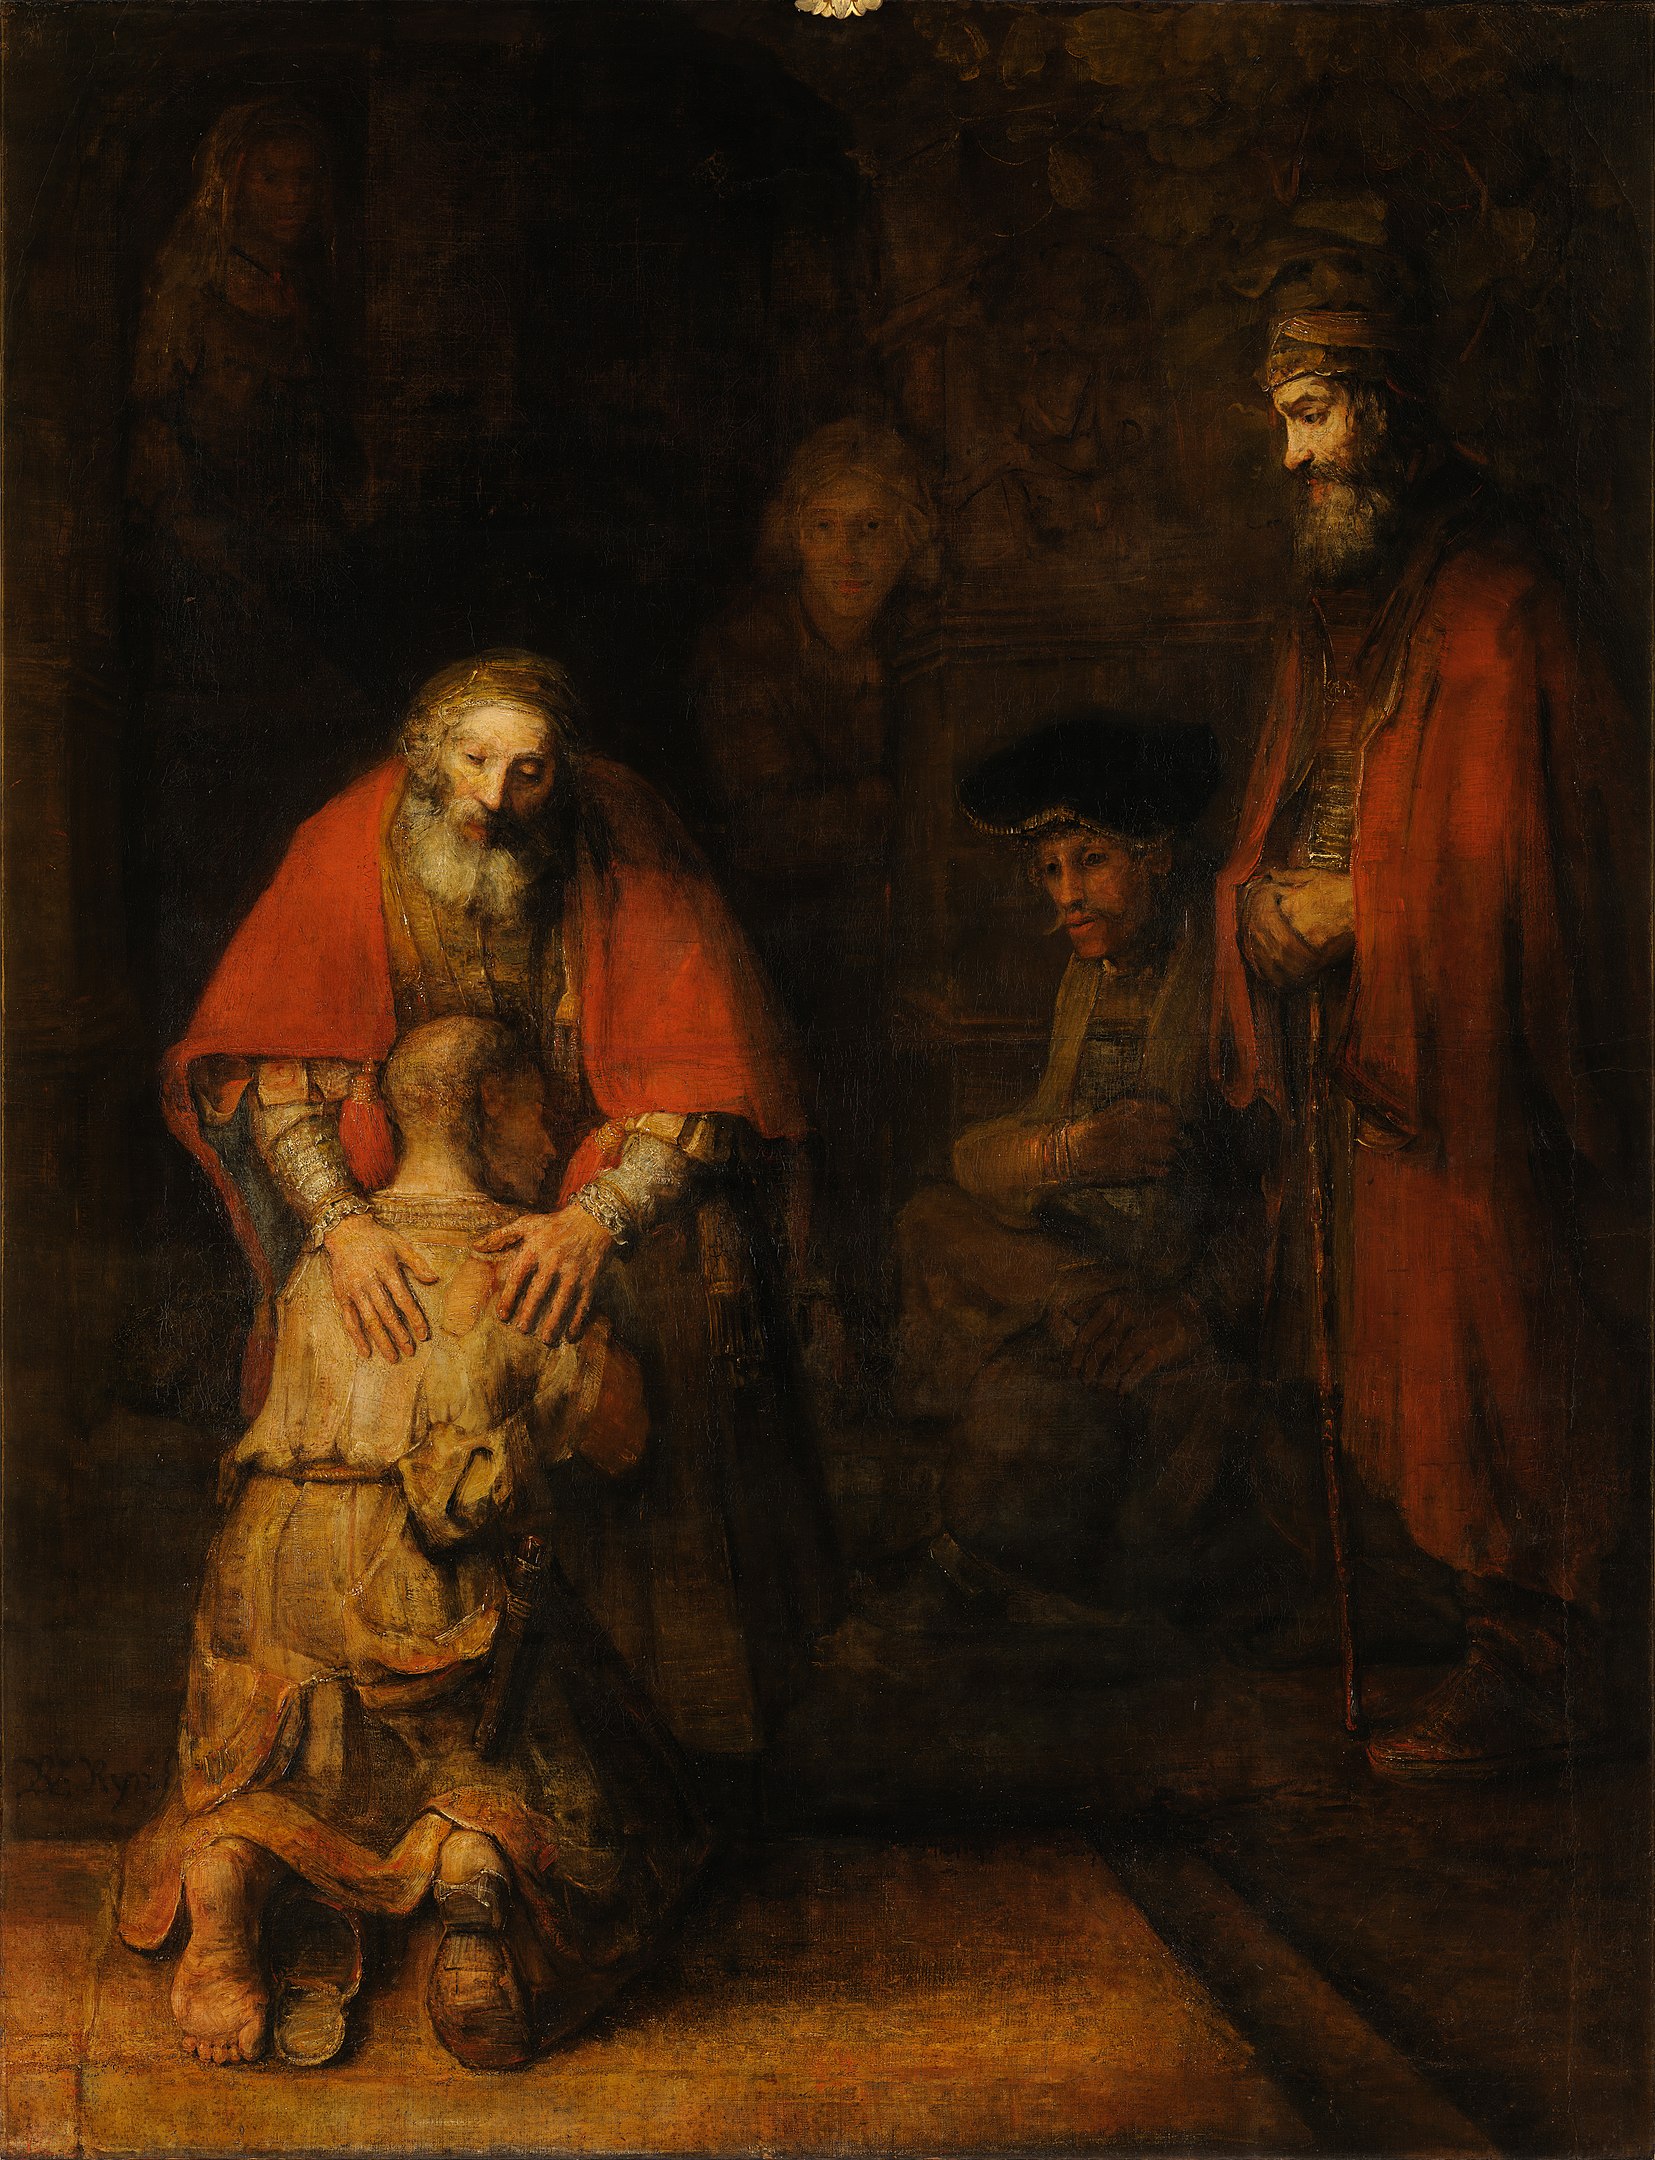 Rembrandt’s painting, The Return of the Prodigal Son